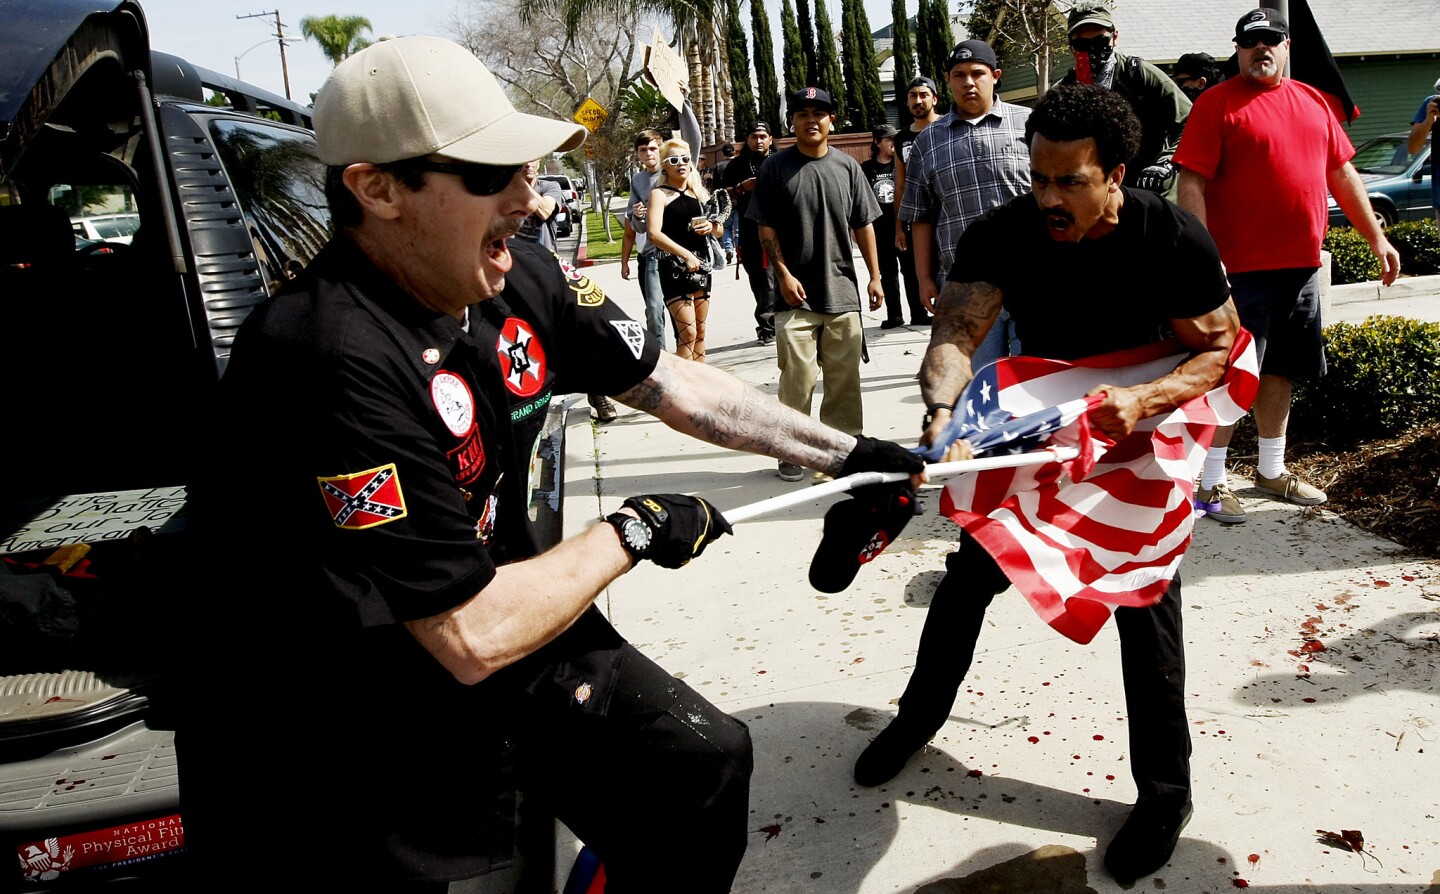 A Ku Klux Klansman, left, struggles with a protester for an American flag after members of the KKK tried to start a "White Lives Matter" rally at Pearson Park in Anaheim on Saturday. Three people were treated at the scene for stab wounds, and 13 people were arrested.